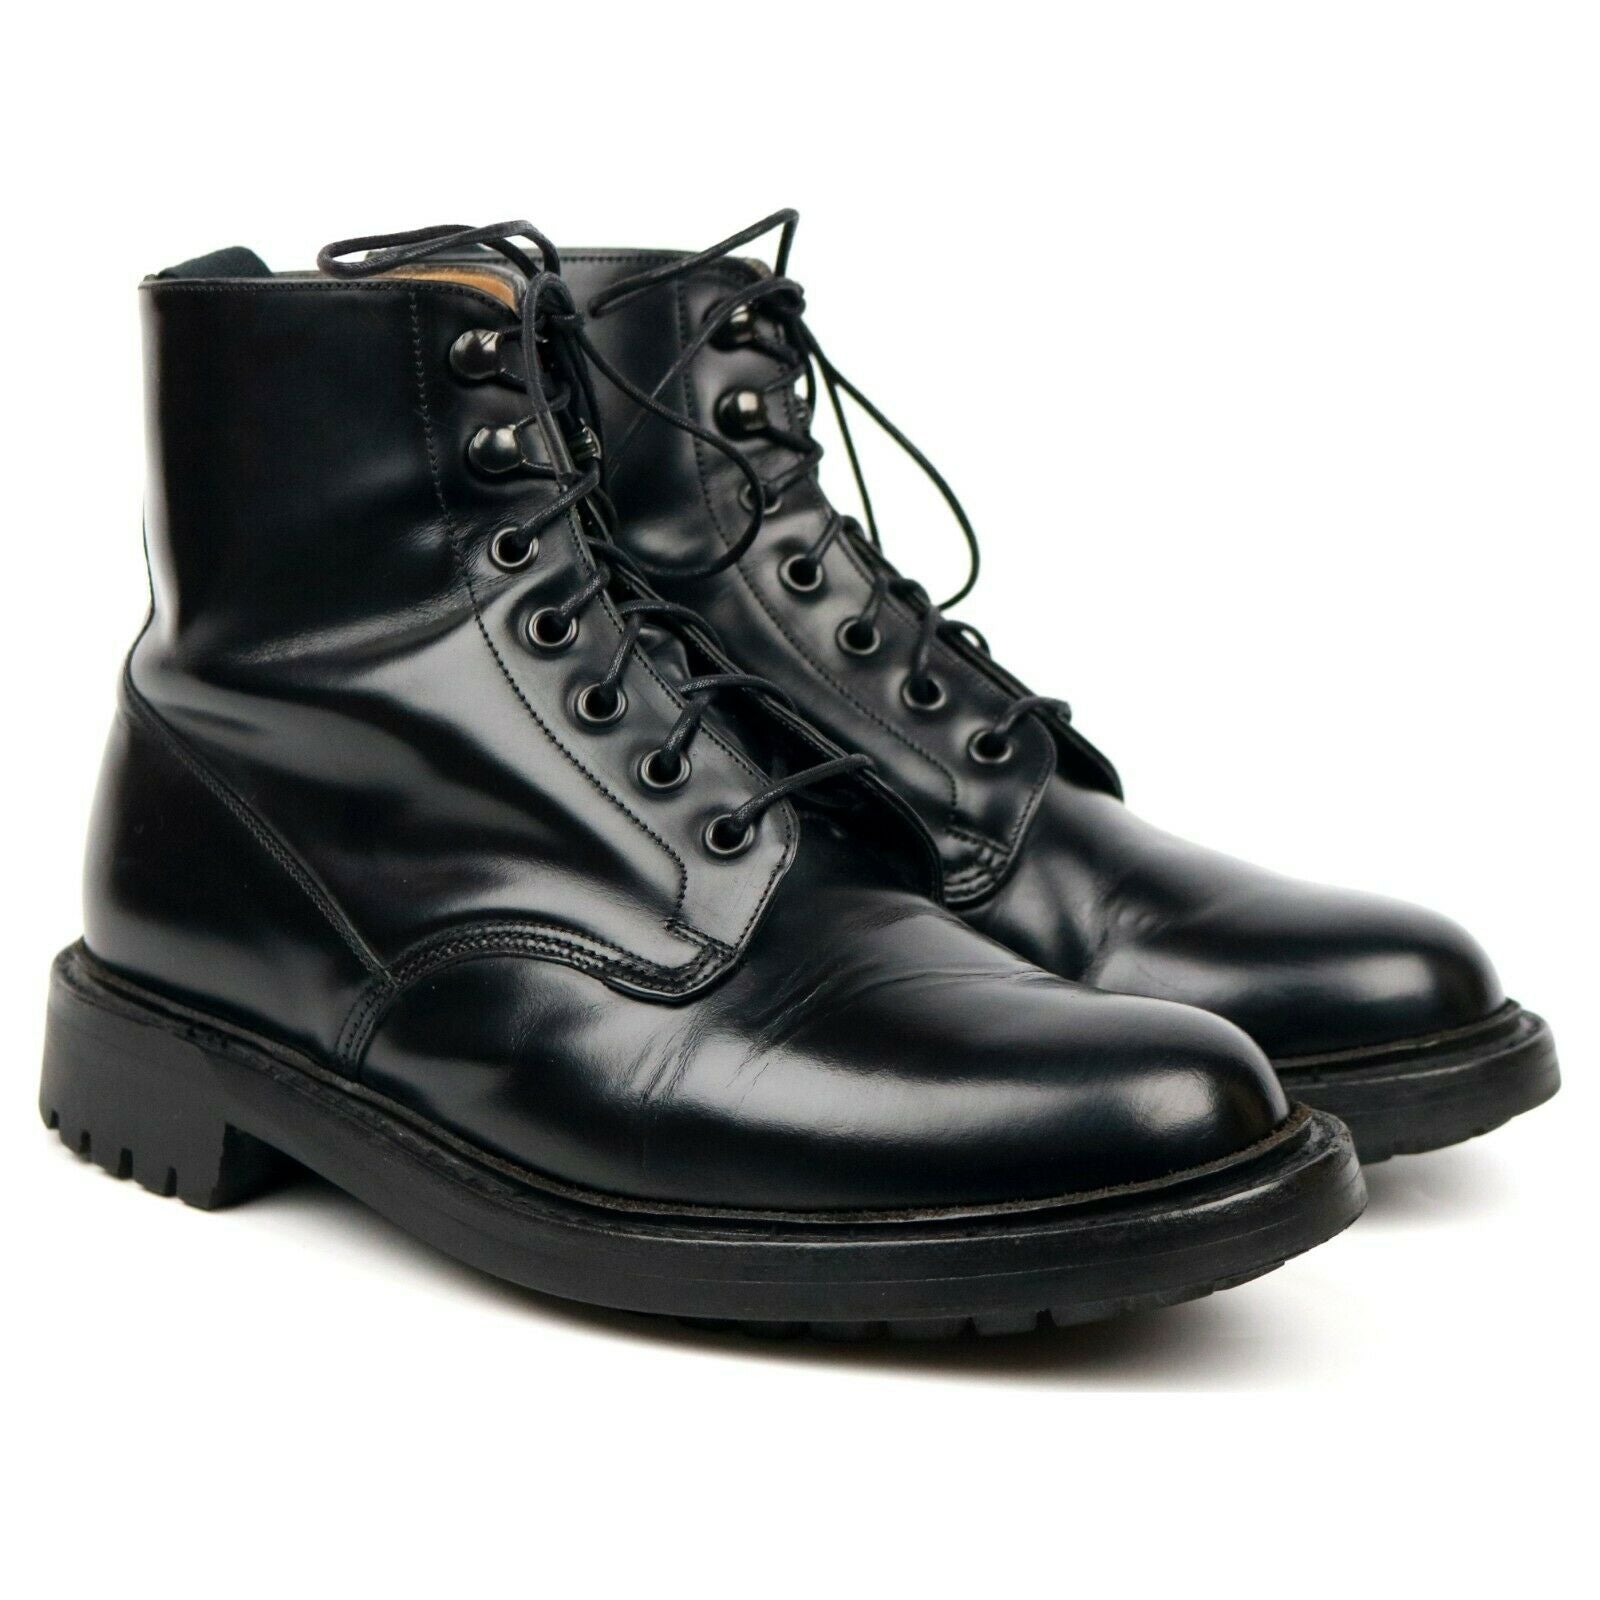 Black Leather Derby Boots UK 6.5 G 